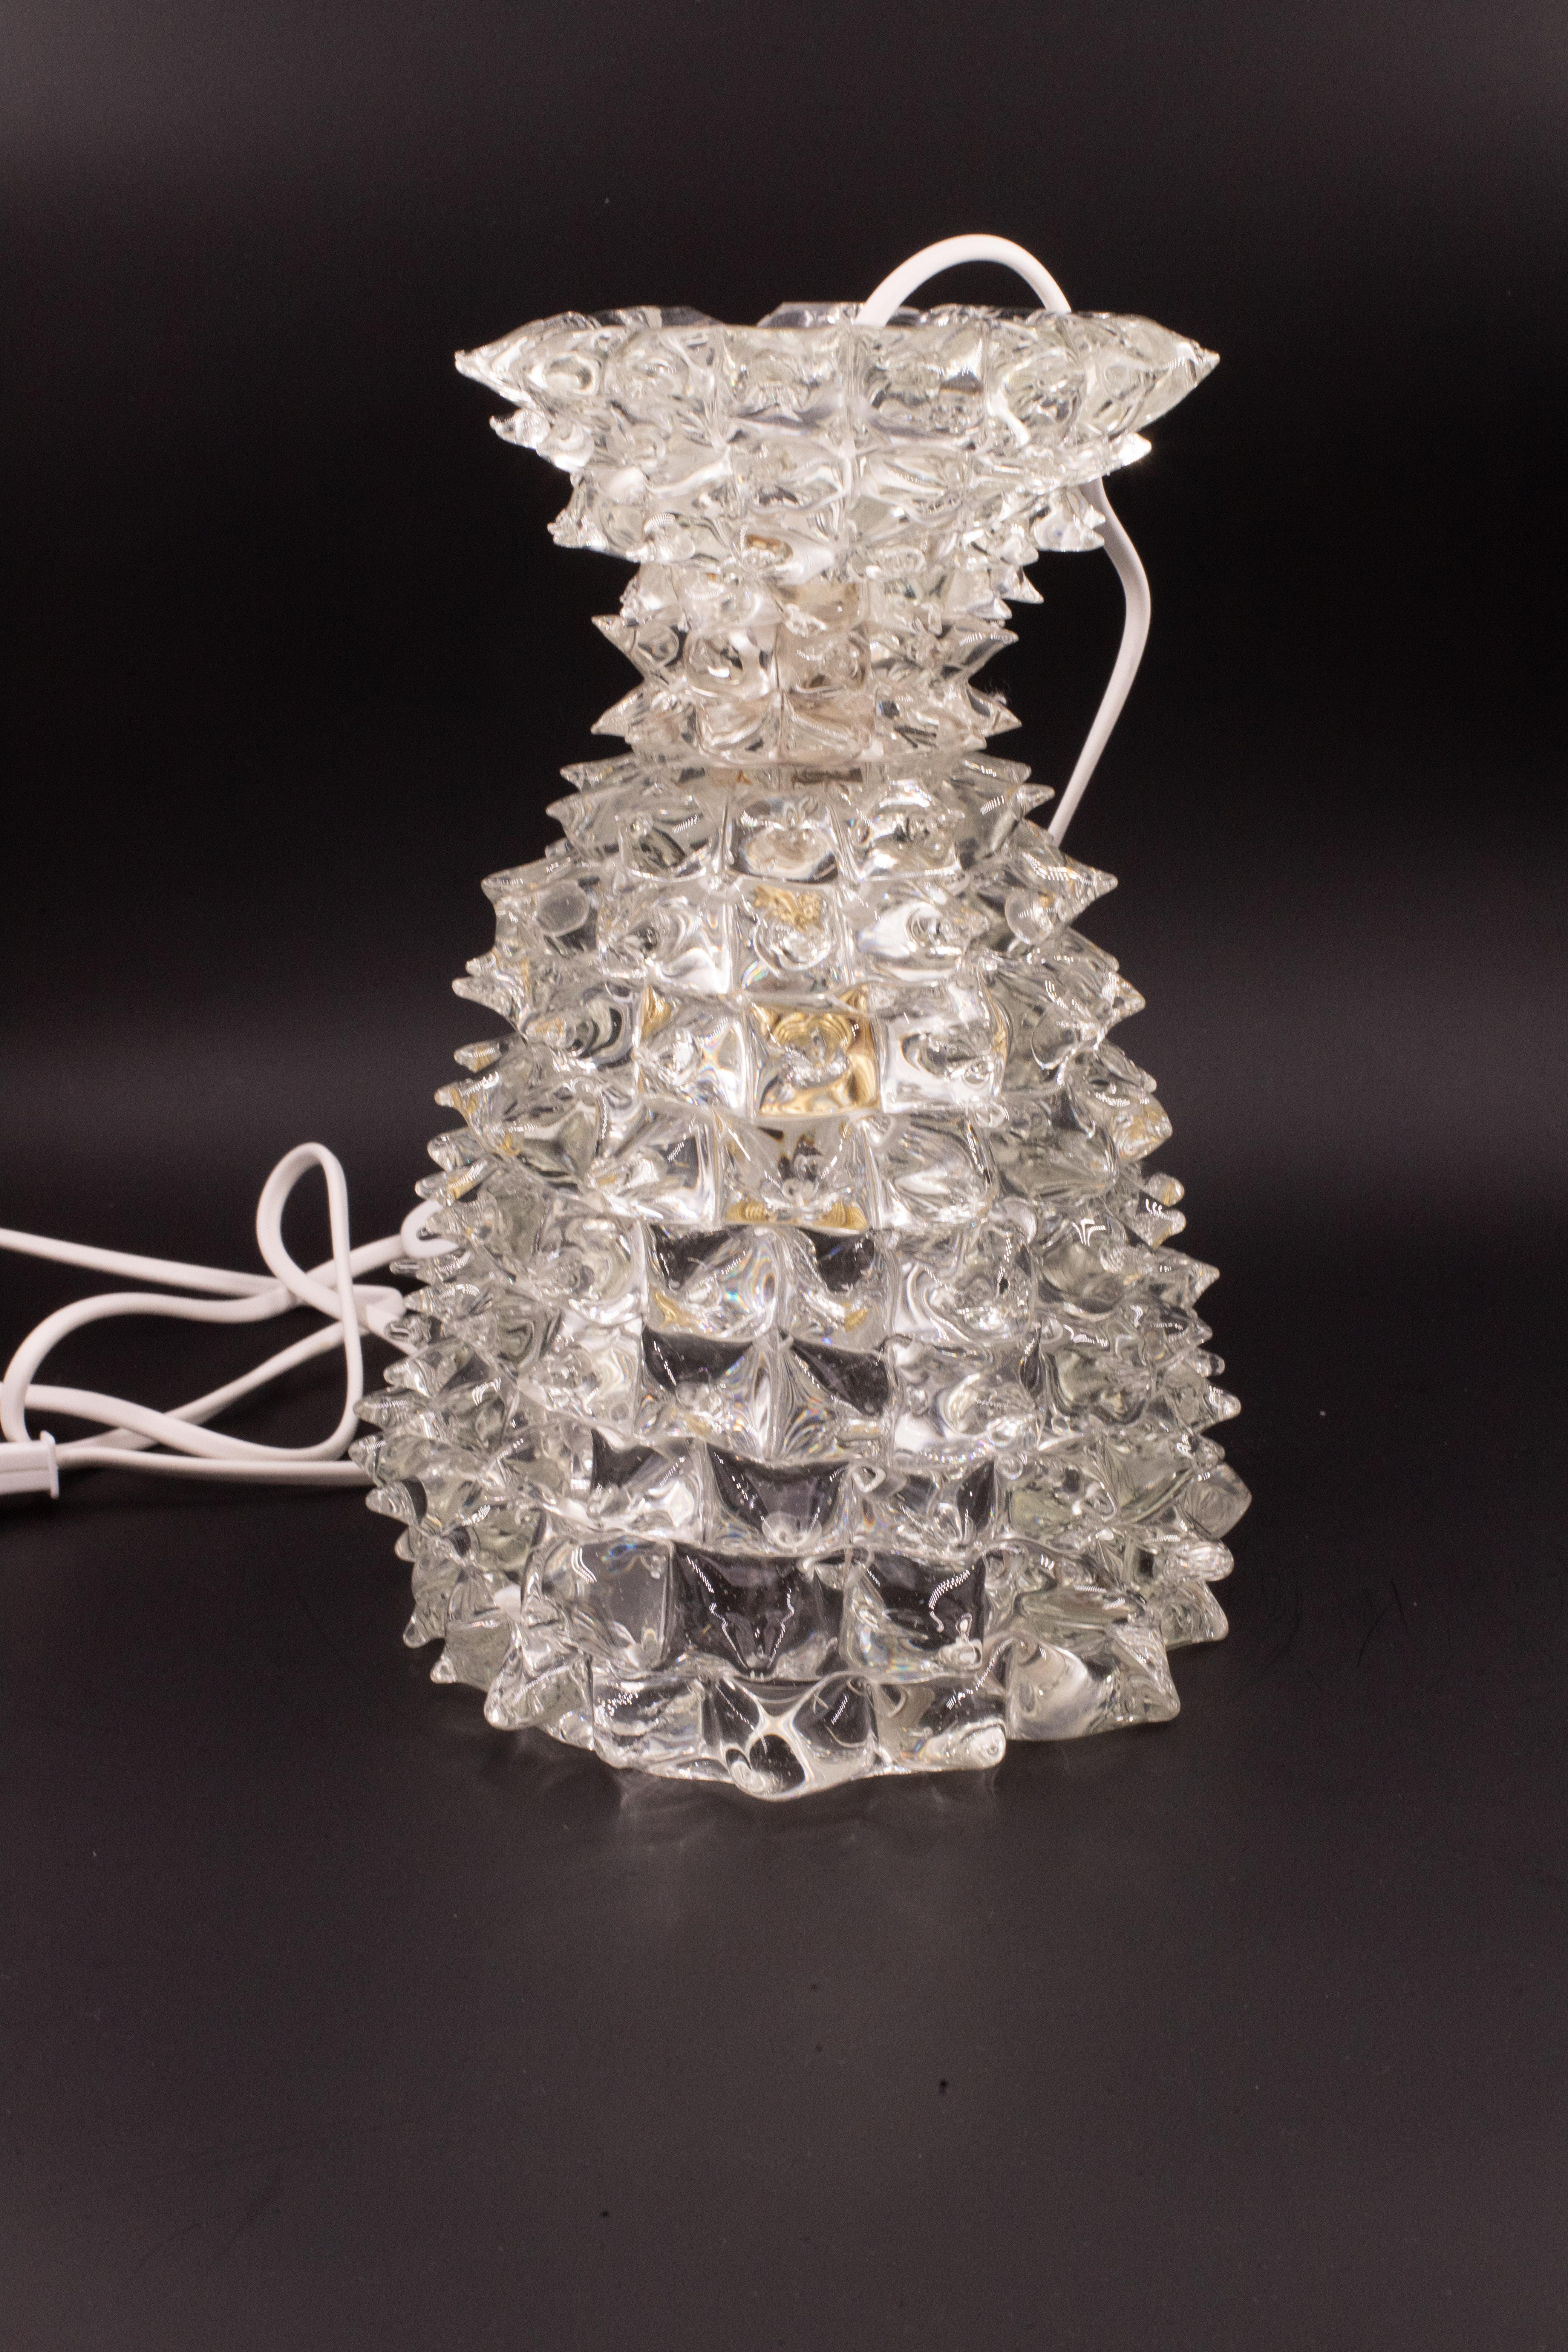 Amazing Table Lamp in Rostrato Murano Glass Vase for Barovier & Toso, 1940s For Sale 4